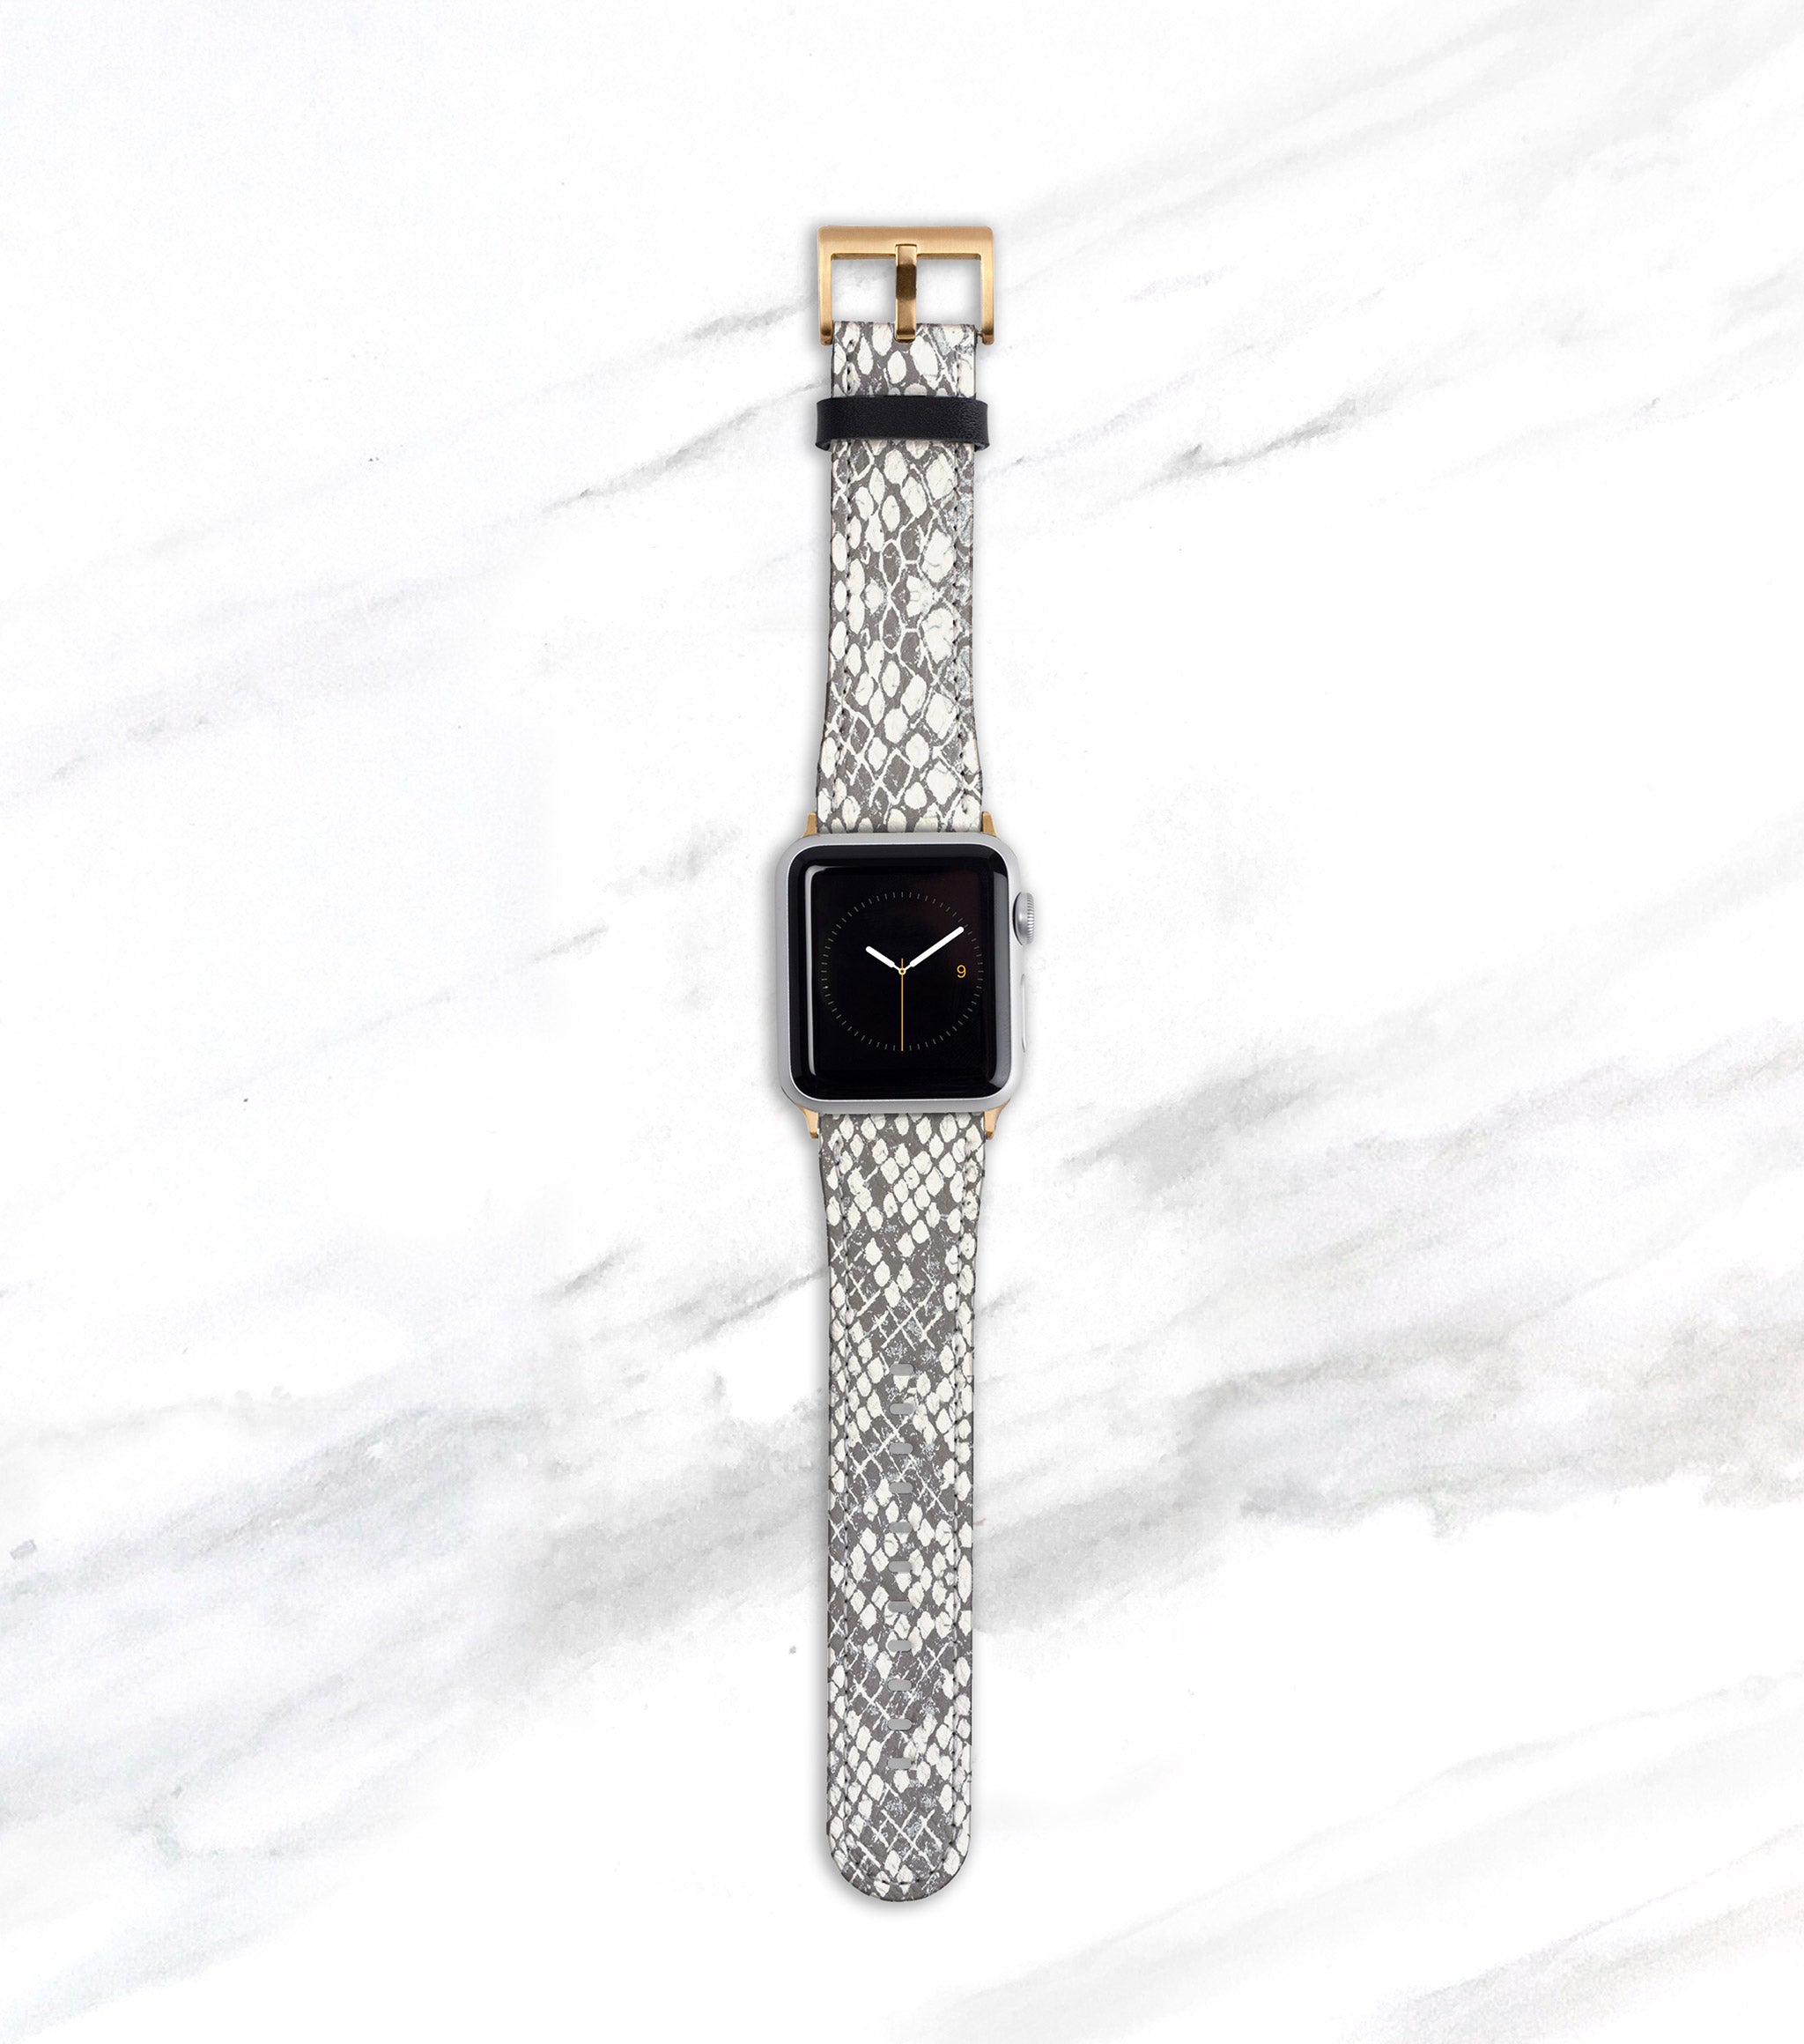 GOLDENERRE | Metallic Snakeskin Printed Band for The Apple Watch